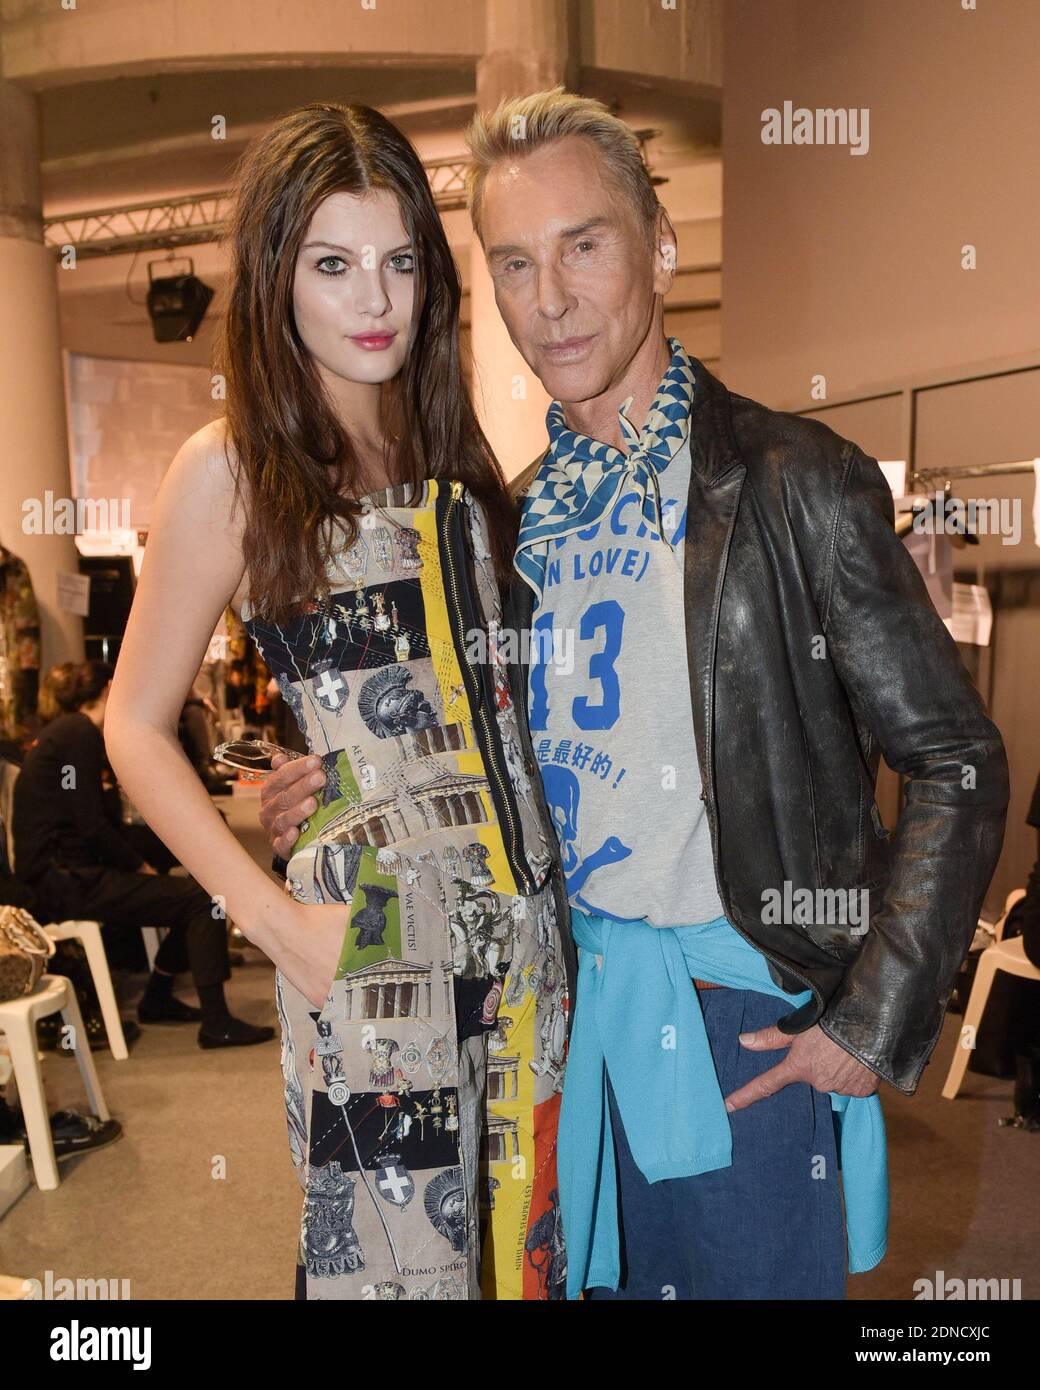 German designer Wolfgang Joop poses with a model backstage ahead of  Wunderkind Fall/Winter 2015-2016 Ready-to-Wear collection show held at the  Palais de Tokyo in Paris, France, March 9, 2015. Photo by Laurent